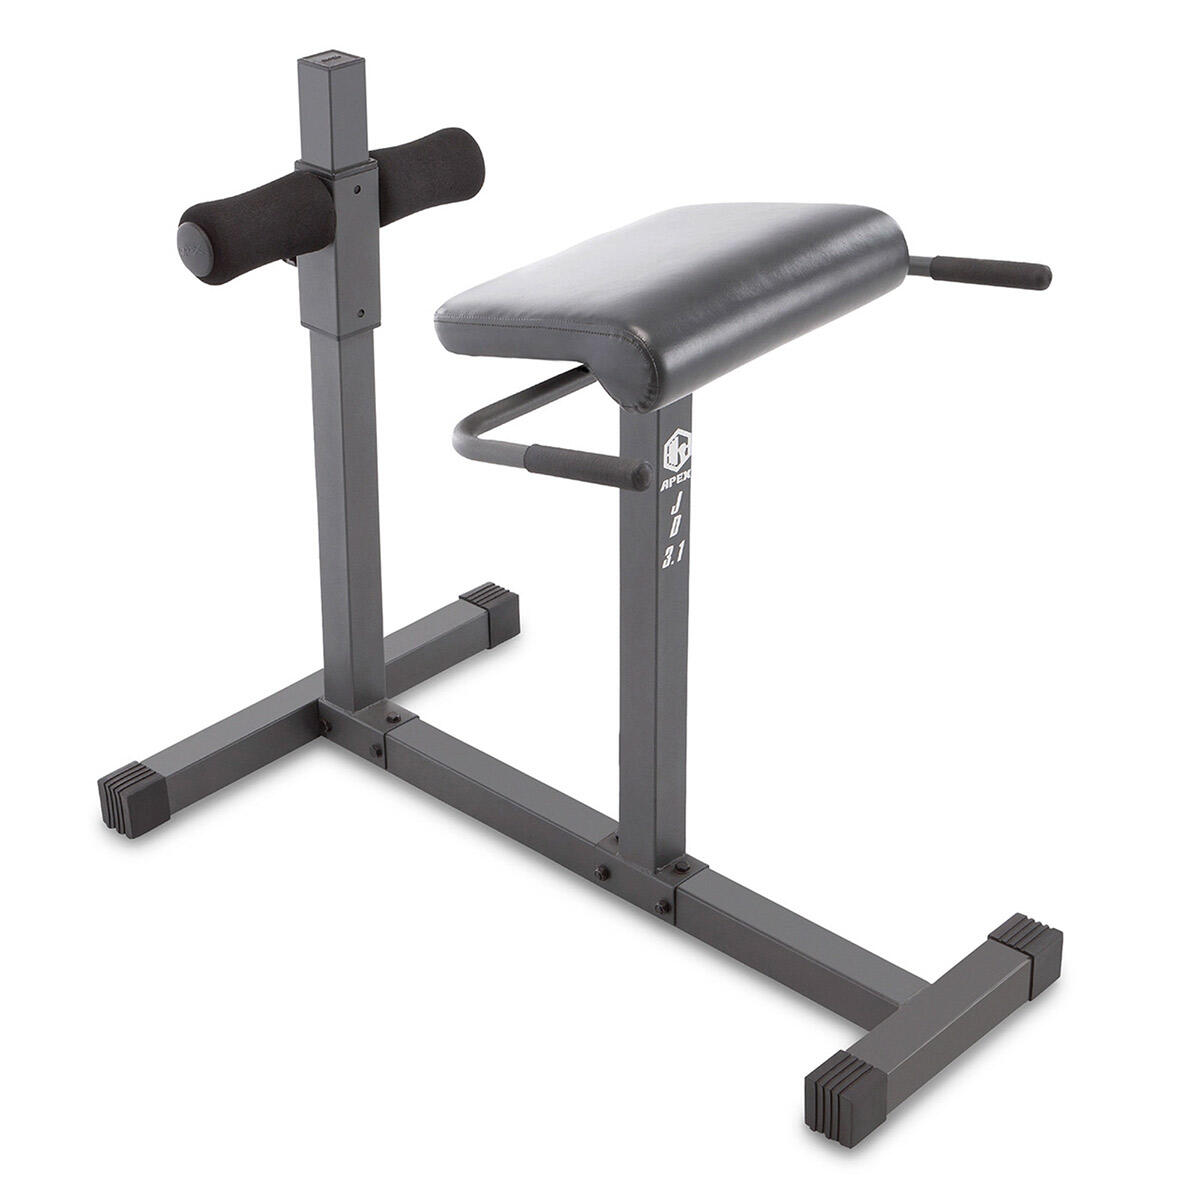 MARCY MARCY JD3.1 HYPER EXTENSION BENCH